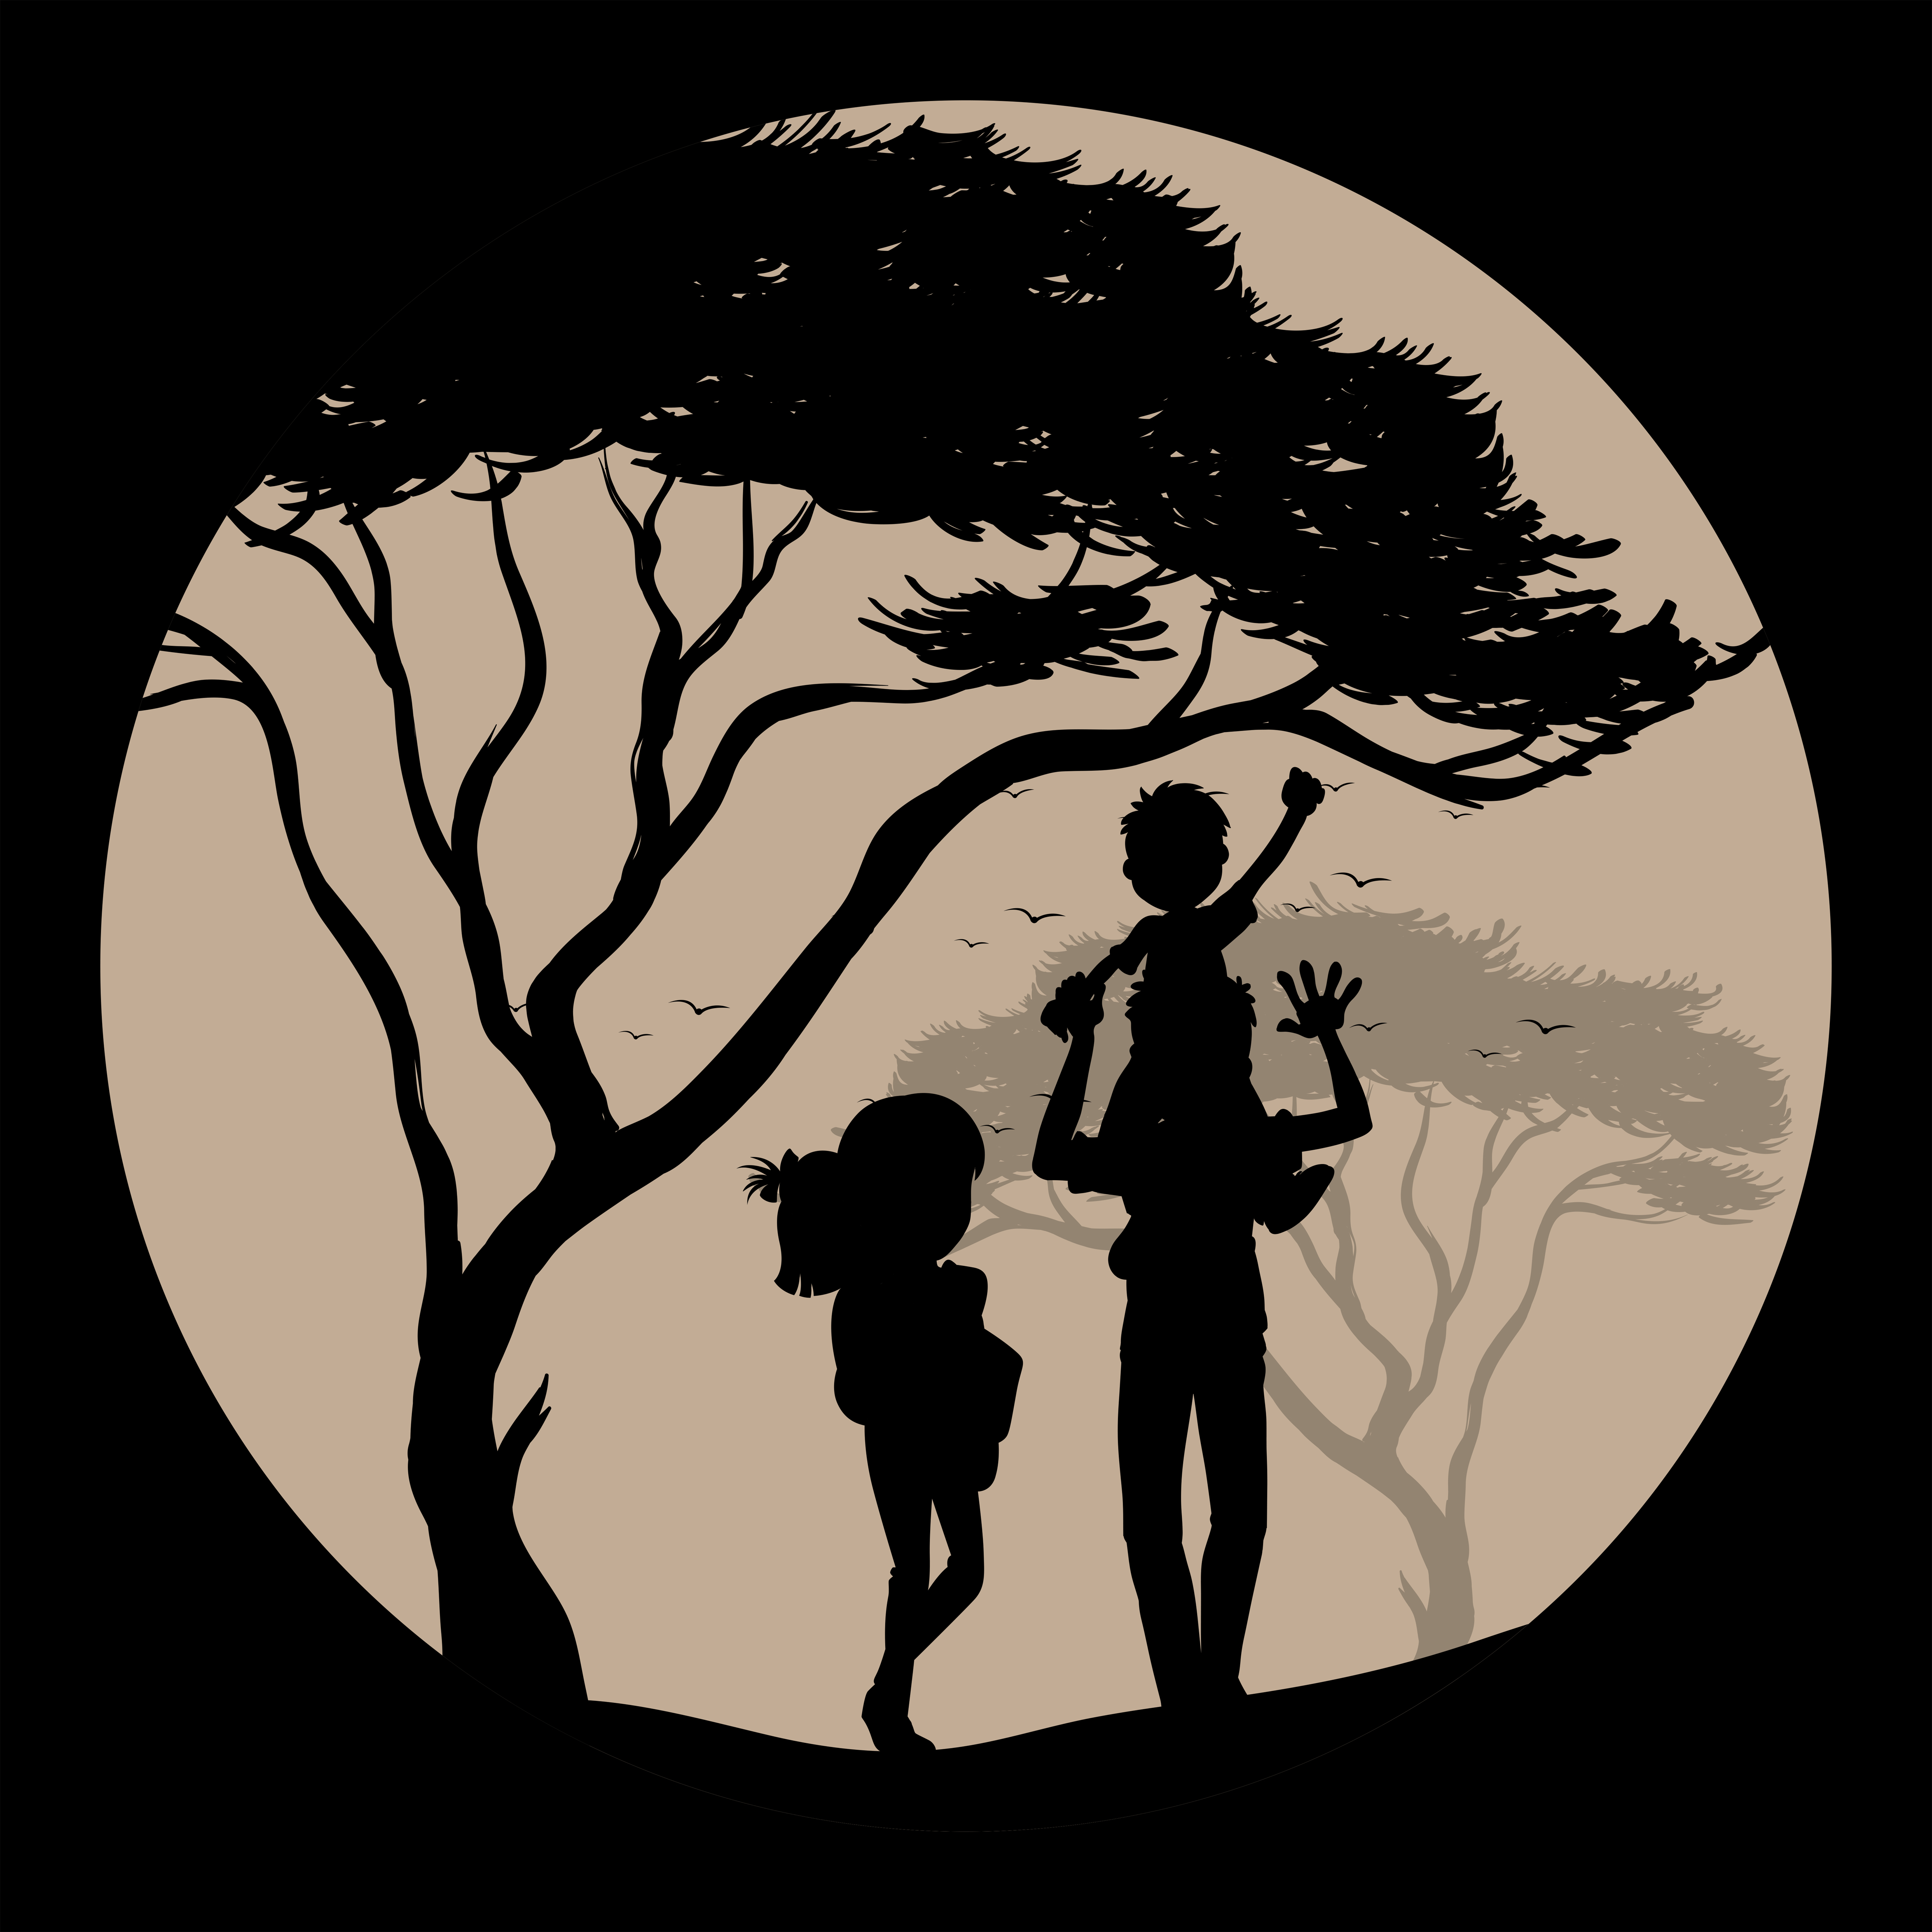 Download Family Tree Silhouette Free Vector Art - (159 Free Downloads)